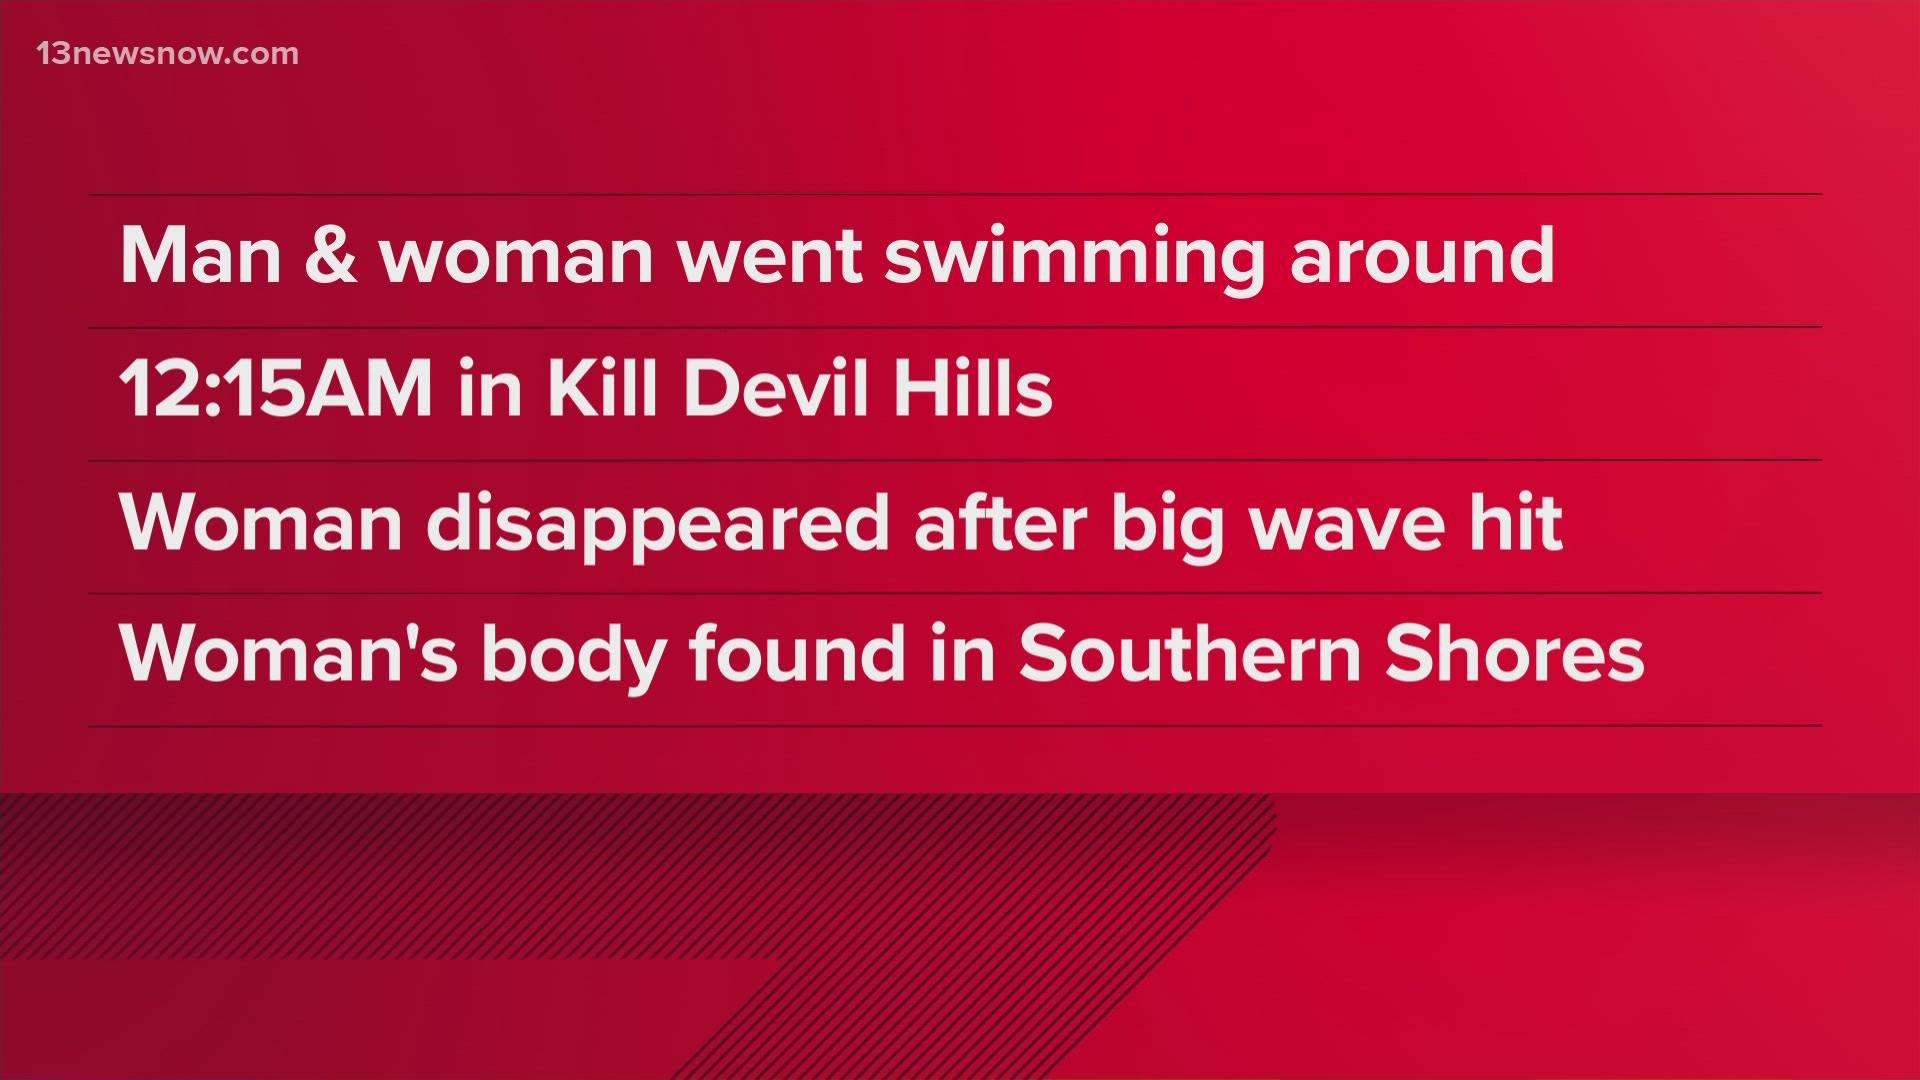 A man and woman were swimming together around 12:15 a.m., in rough conditions, when they got hit by a large wave. The man resurfaced but said his friend did not.